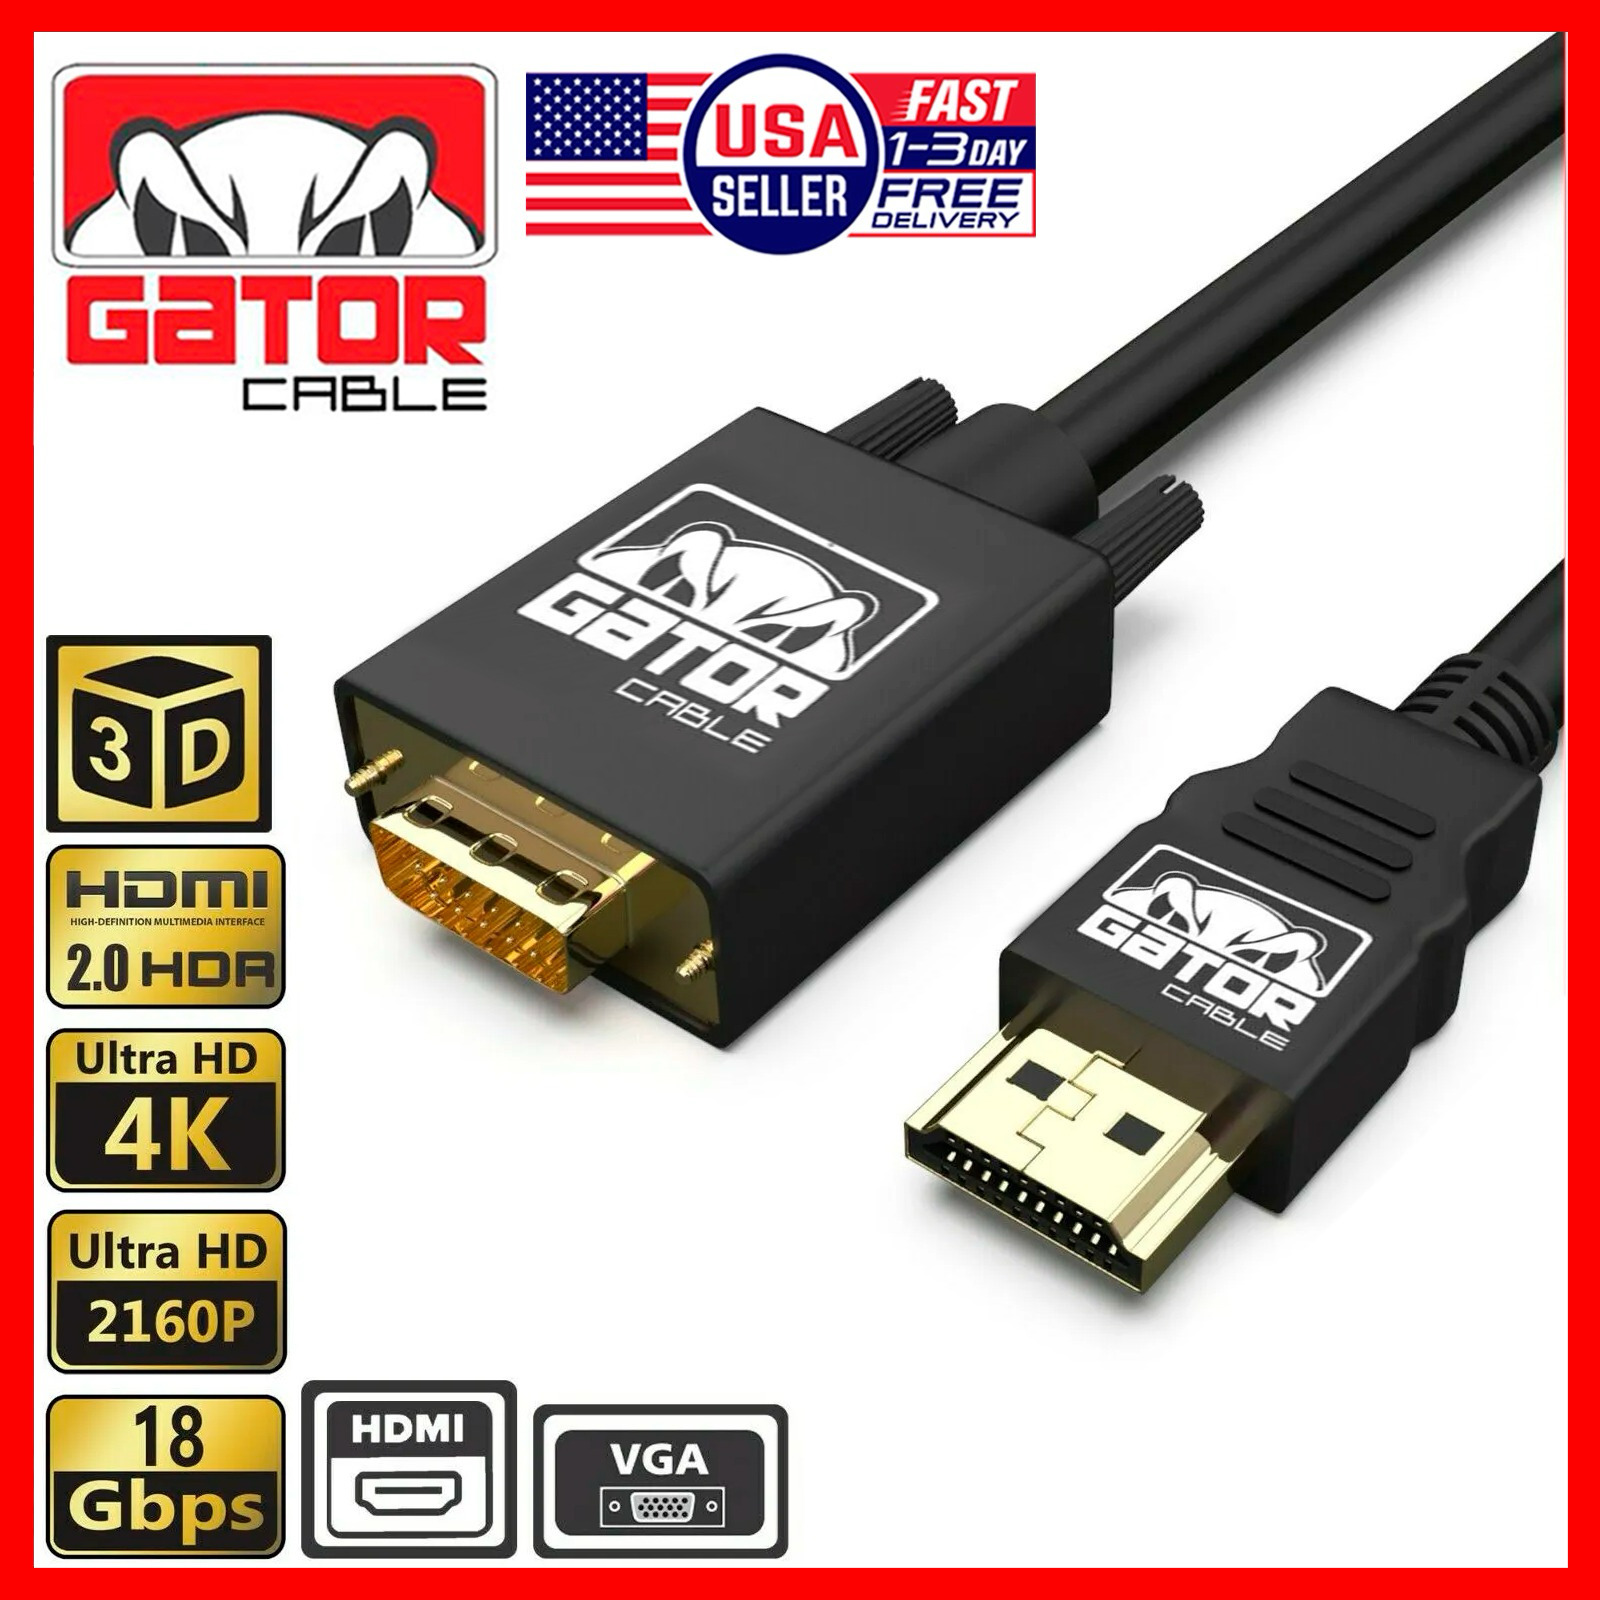 HDMI to VGA Cable Adapter Converter for HDTV PC Desktop Monitor Laptop 4K Video